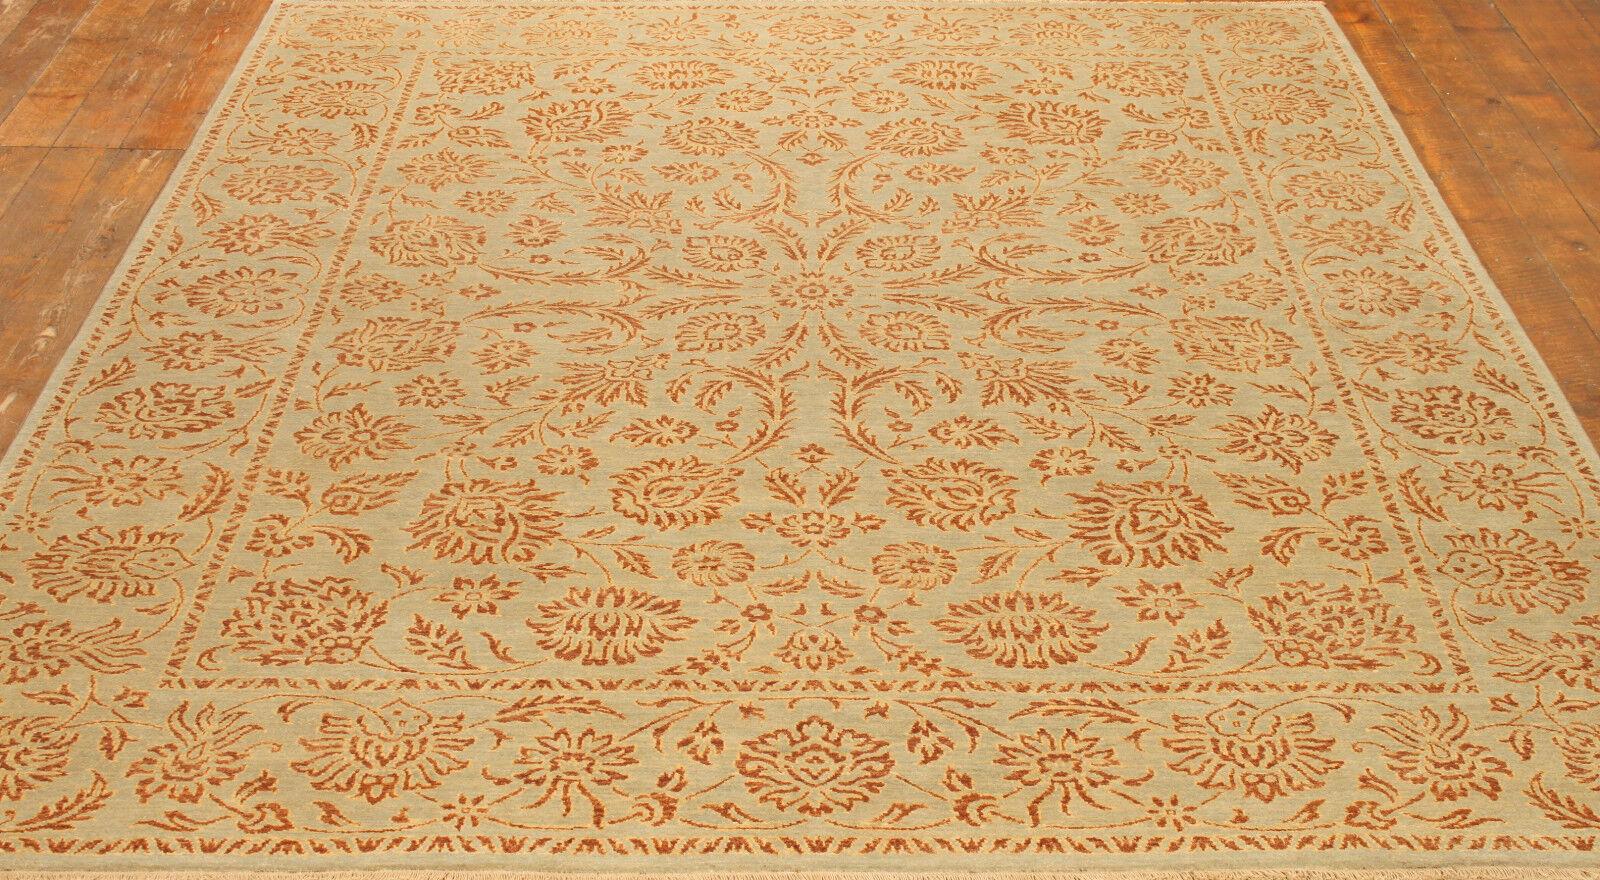 Discover the allure of Afghan artistry with this Handmade Vintage Afghan Zigler Rug, a treasure from the 1990s that remains in good condition, as if new. Spanning 8.1’ x 10’, this rug is woven from the finest wool, offering both resilience and